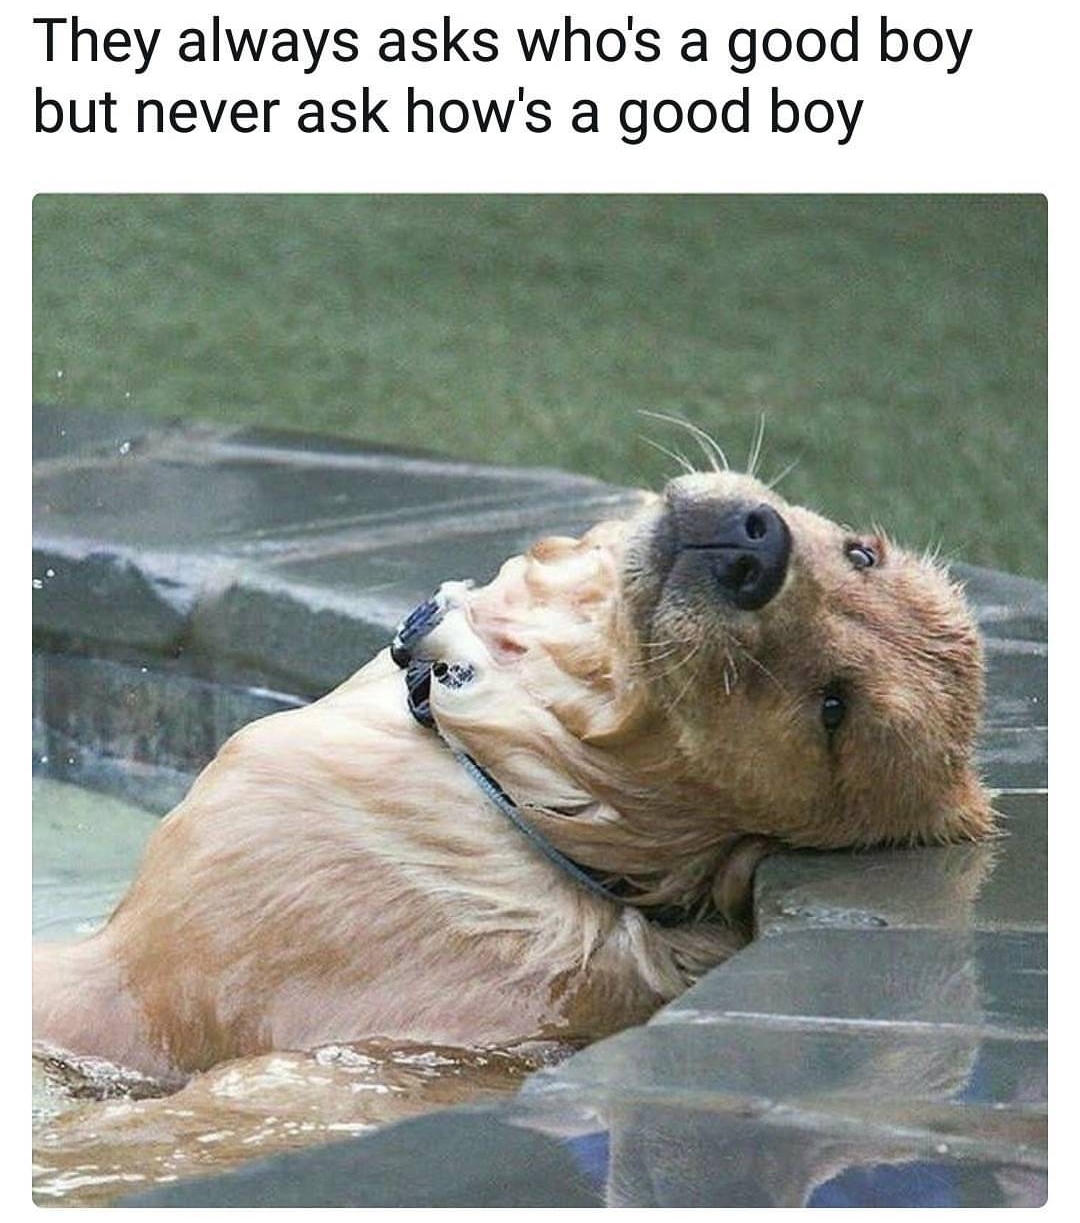 how's a good boy - They always asks who's a good boy but never ask how's a good boy